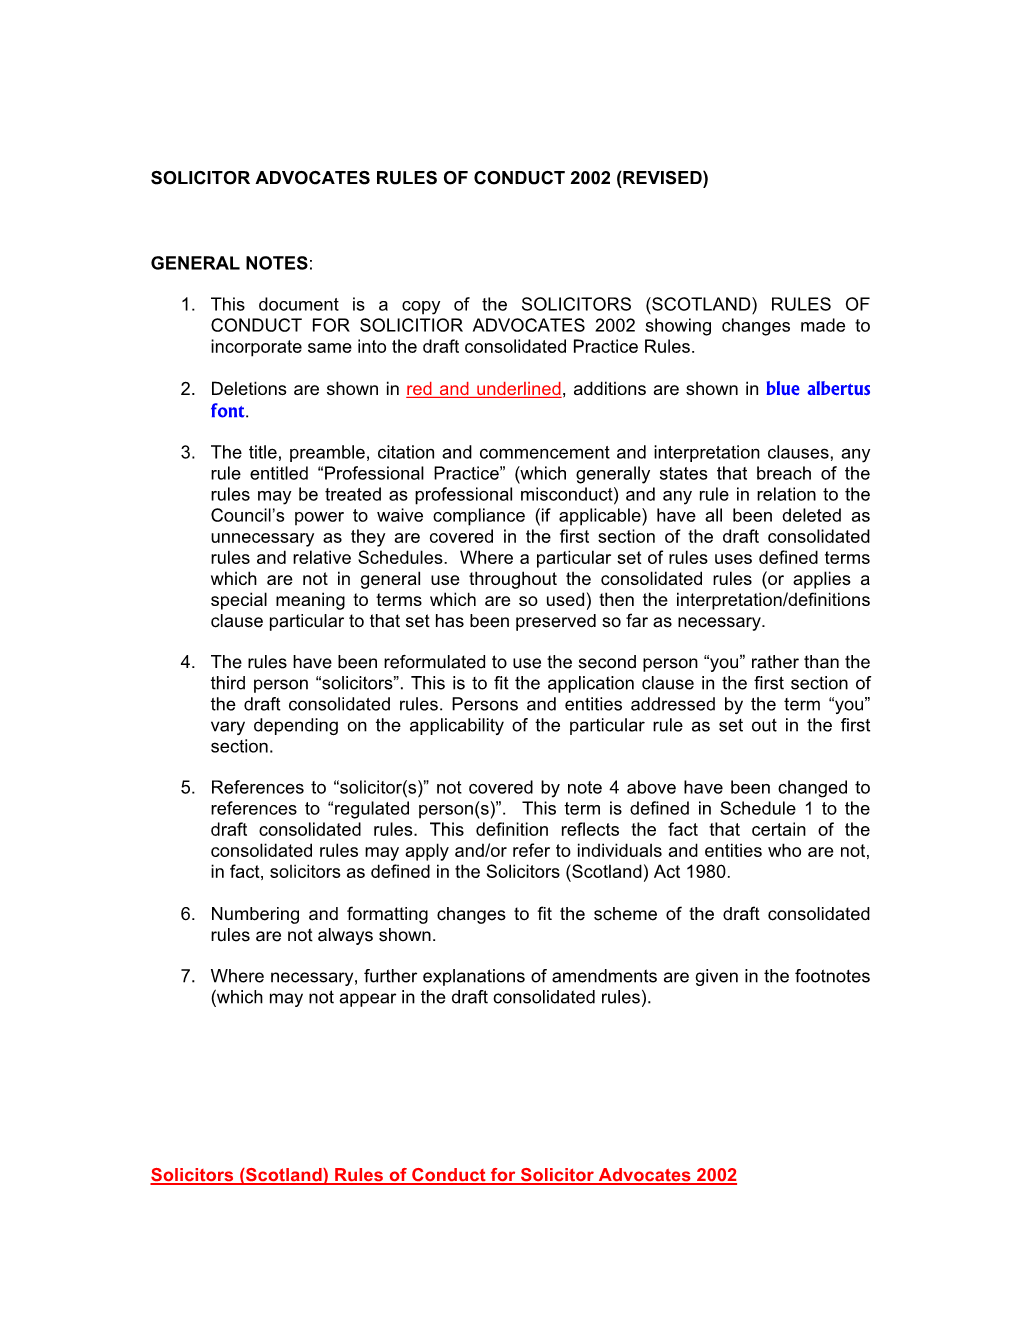 Solicitor Advocates Rules of Conduct 2002 (Revised)